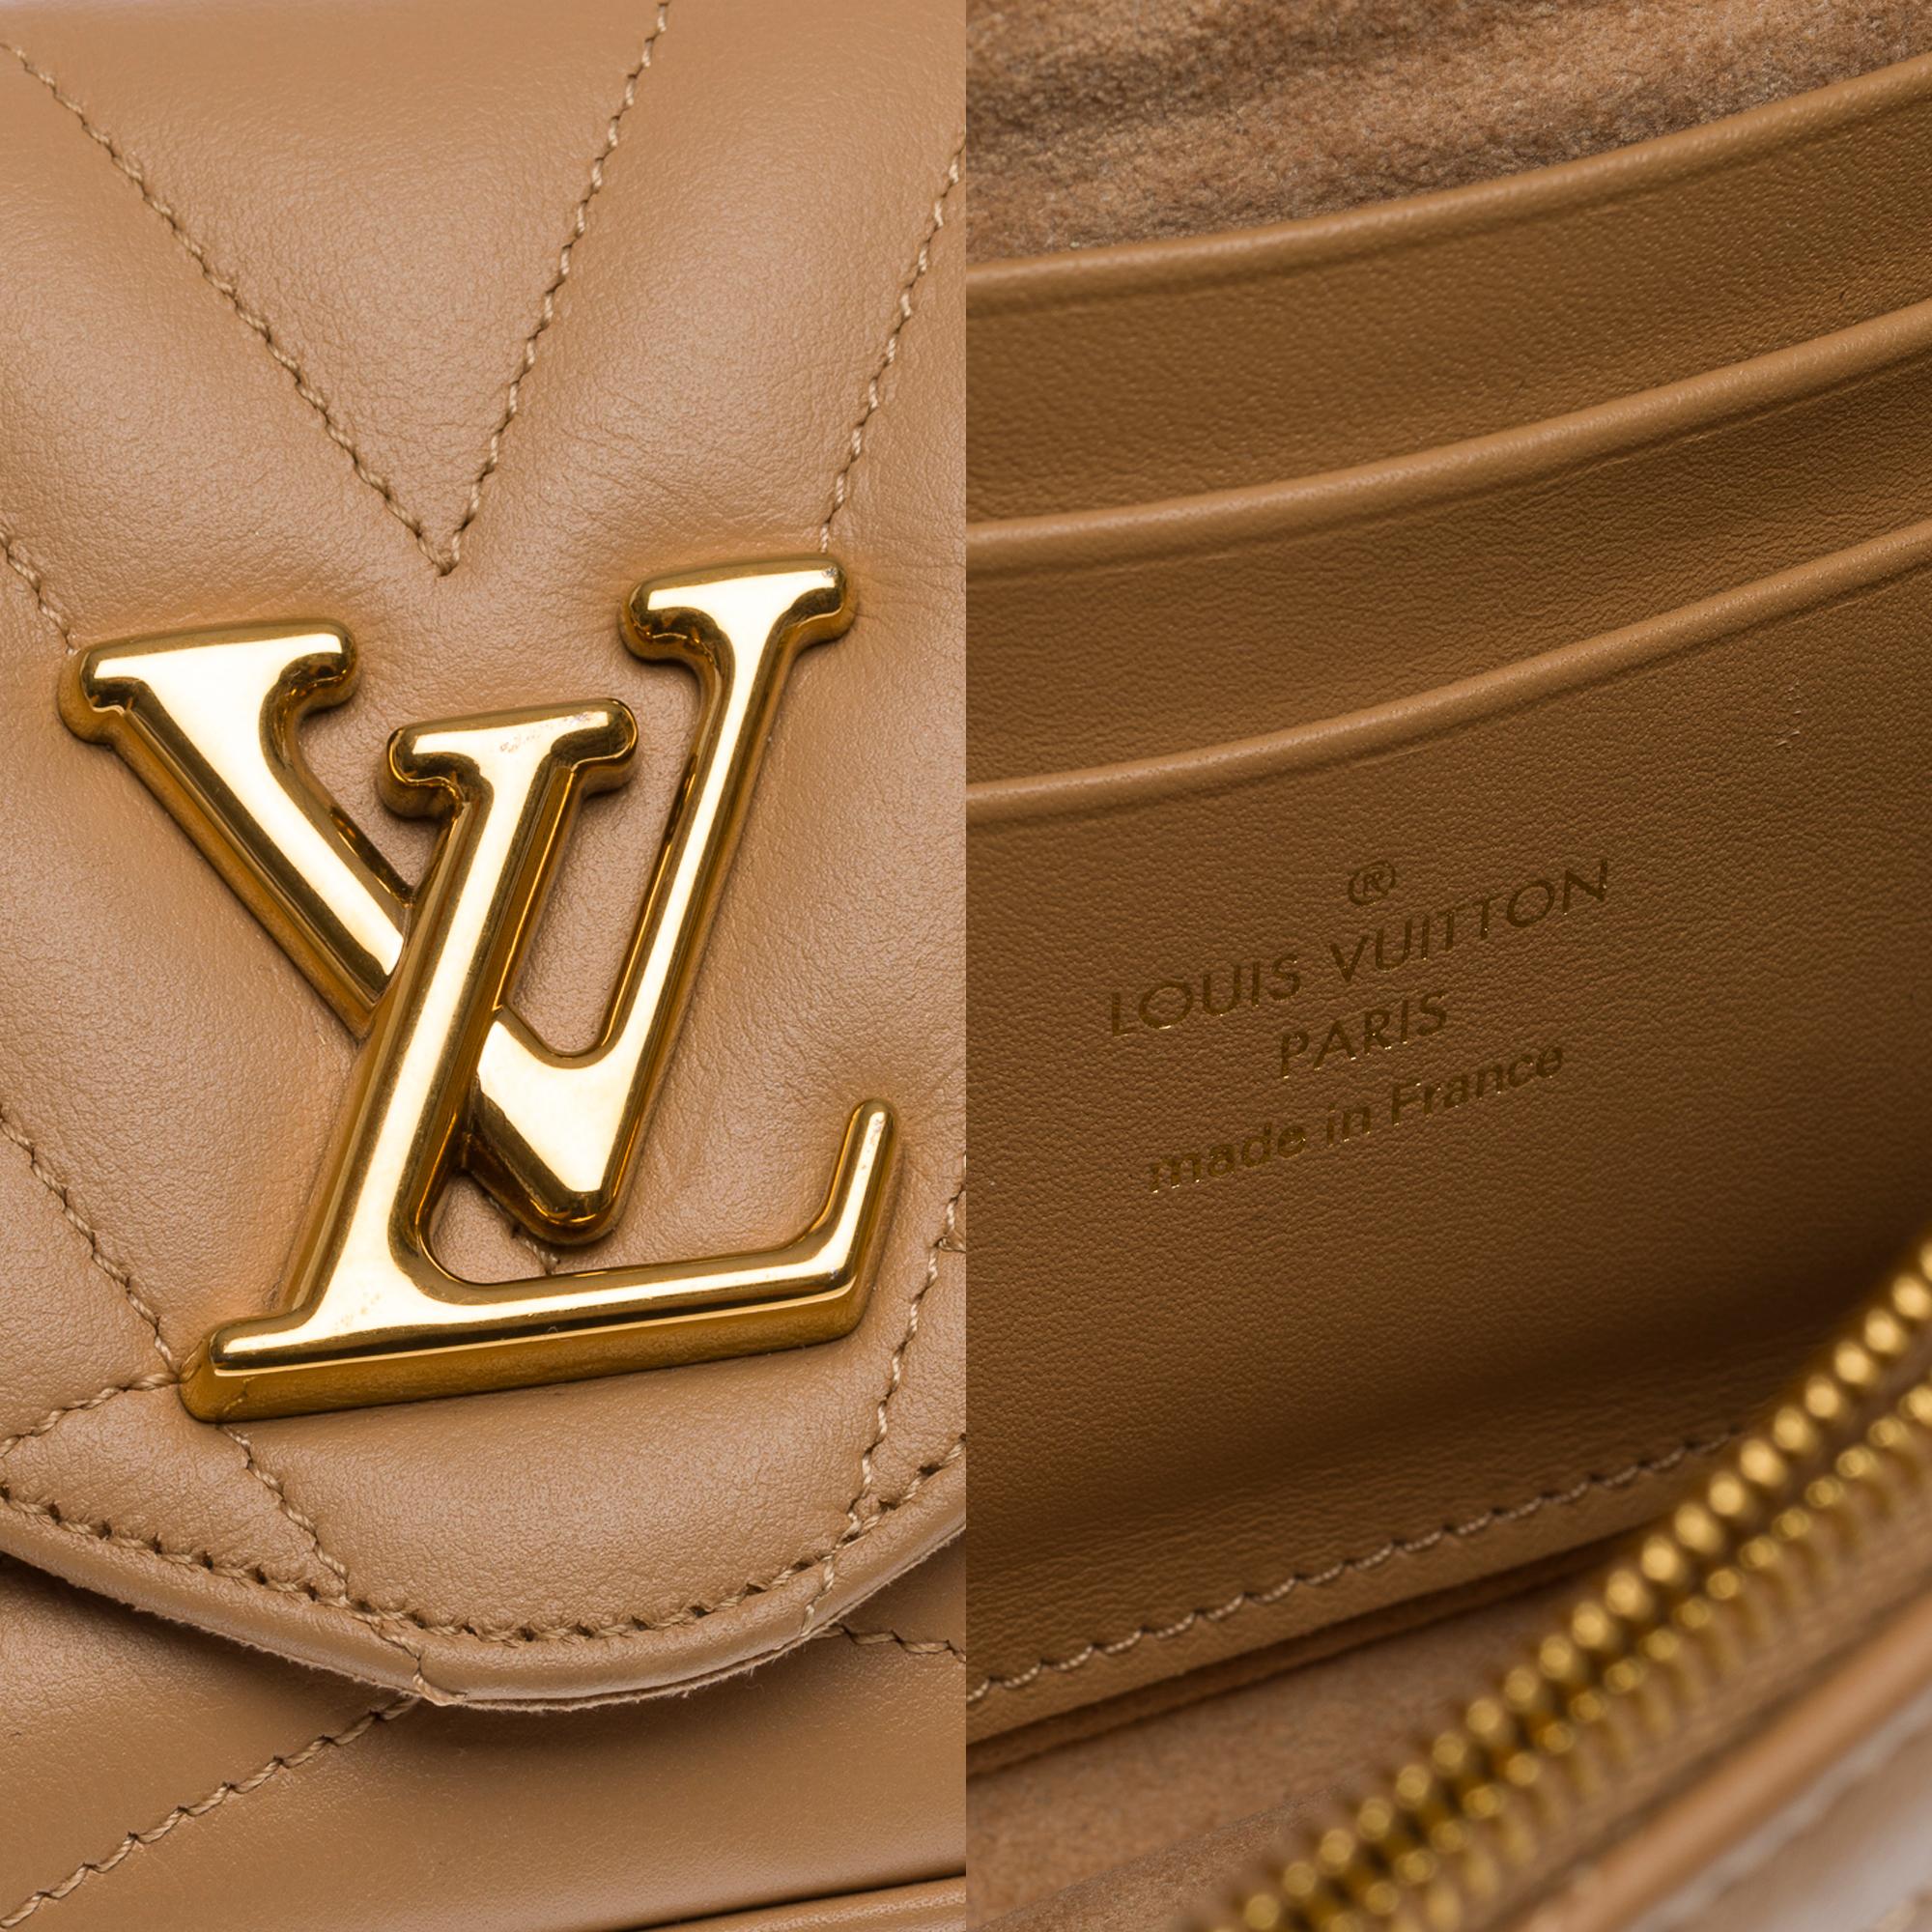 Louis Vuitton New Wave shoulder bag in hazelnut quilted calf leather, GHW 2